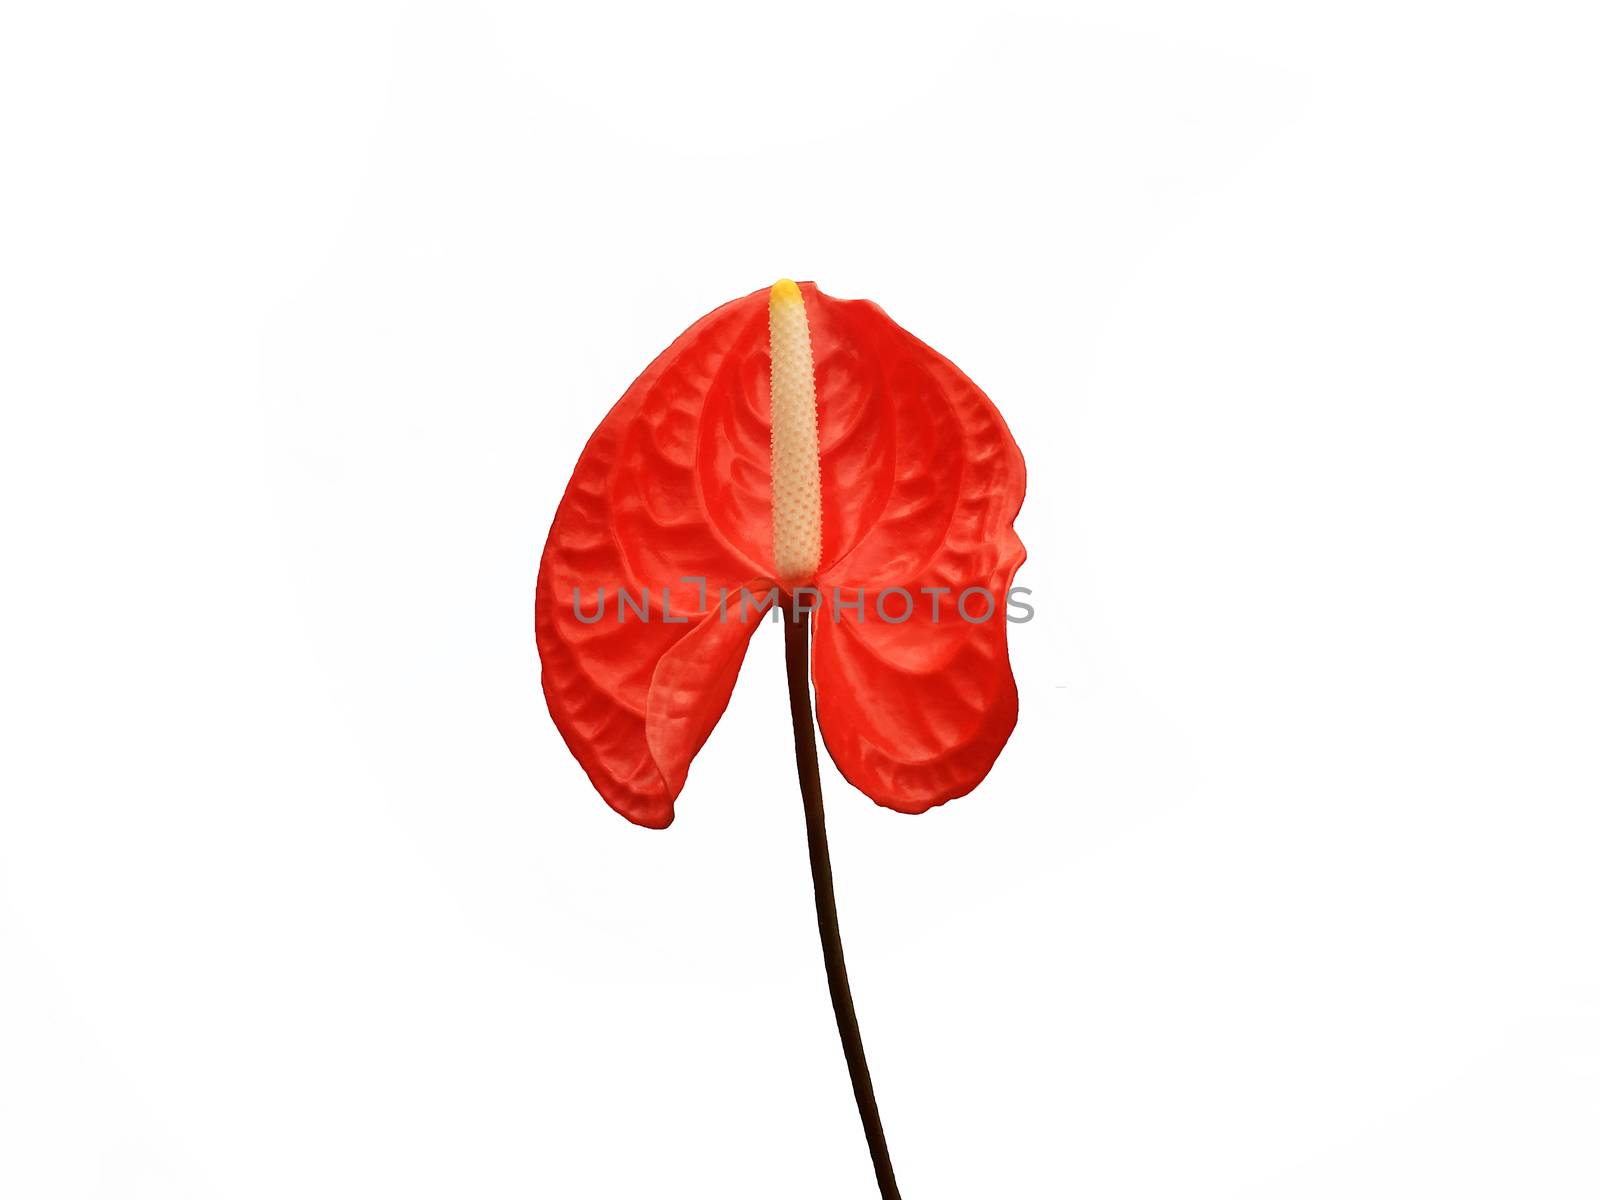 Dark red anthurium isolated on white background by orsor